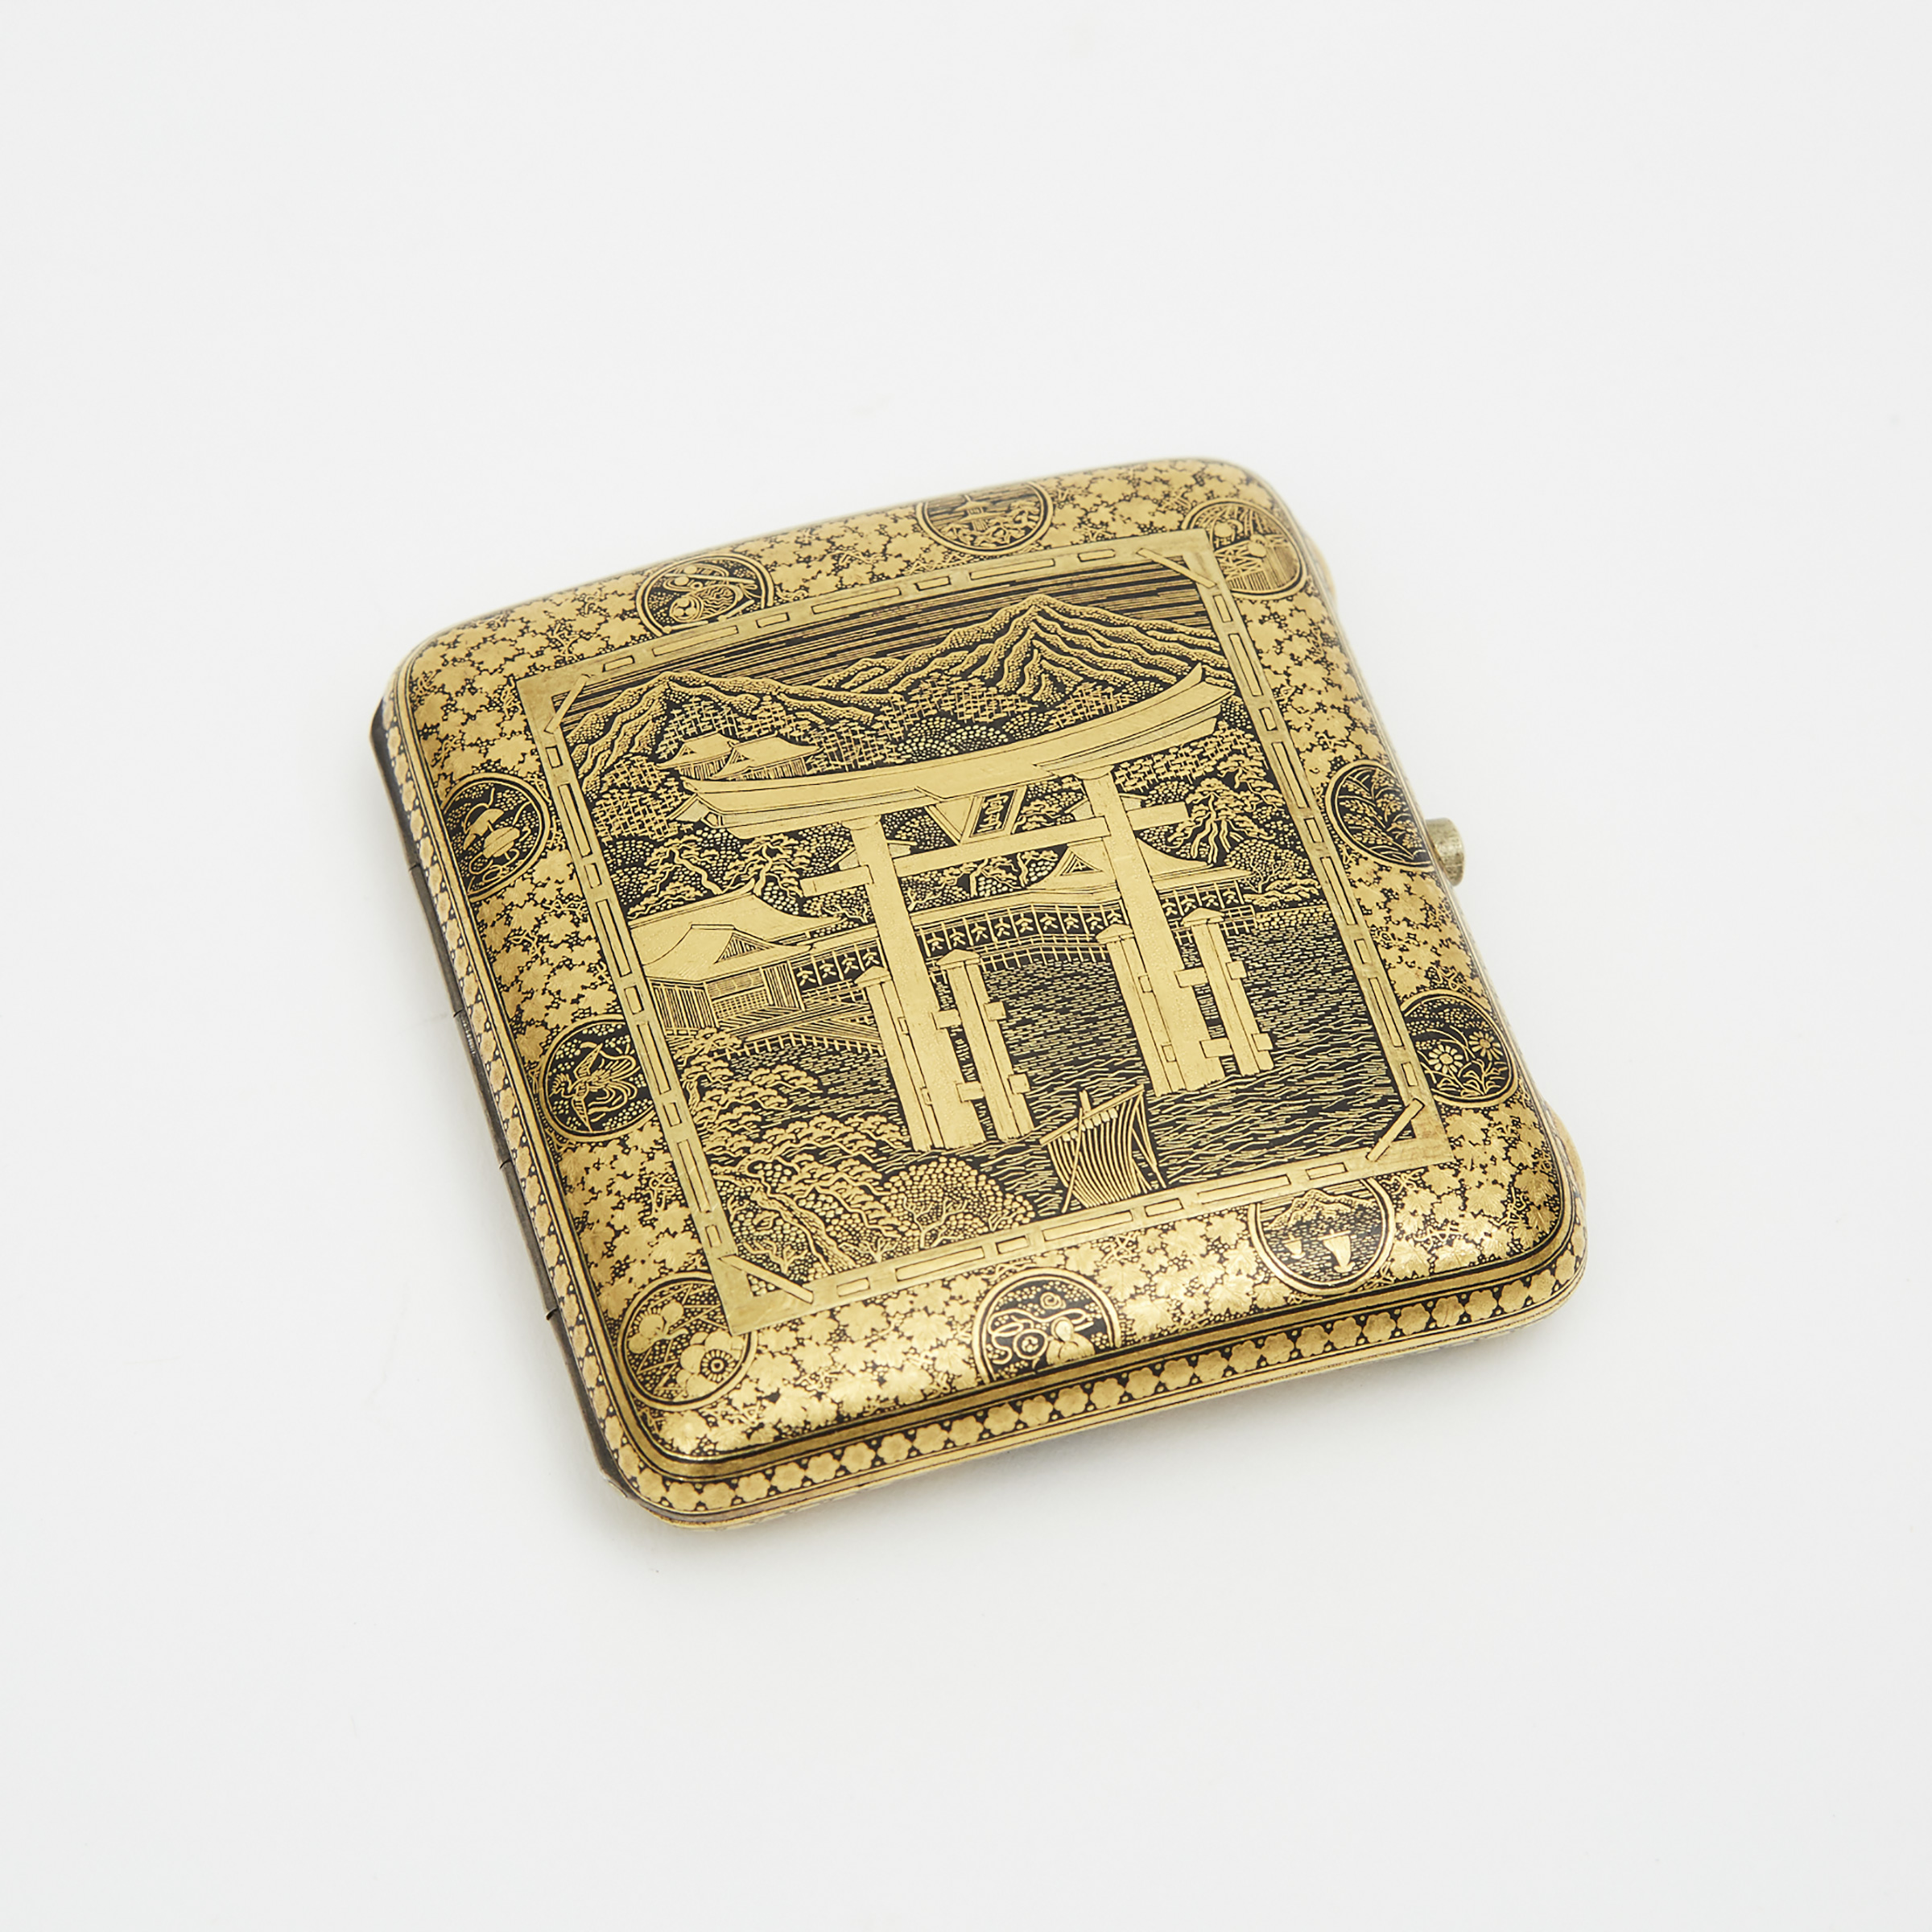 A Gold and Silver Inlaid Cigarette Case, By the Komai Company of Kyoto, Circa 1900